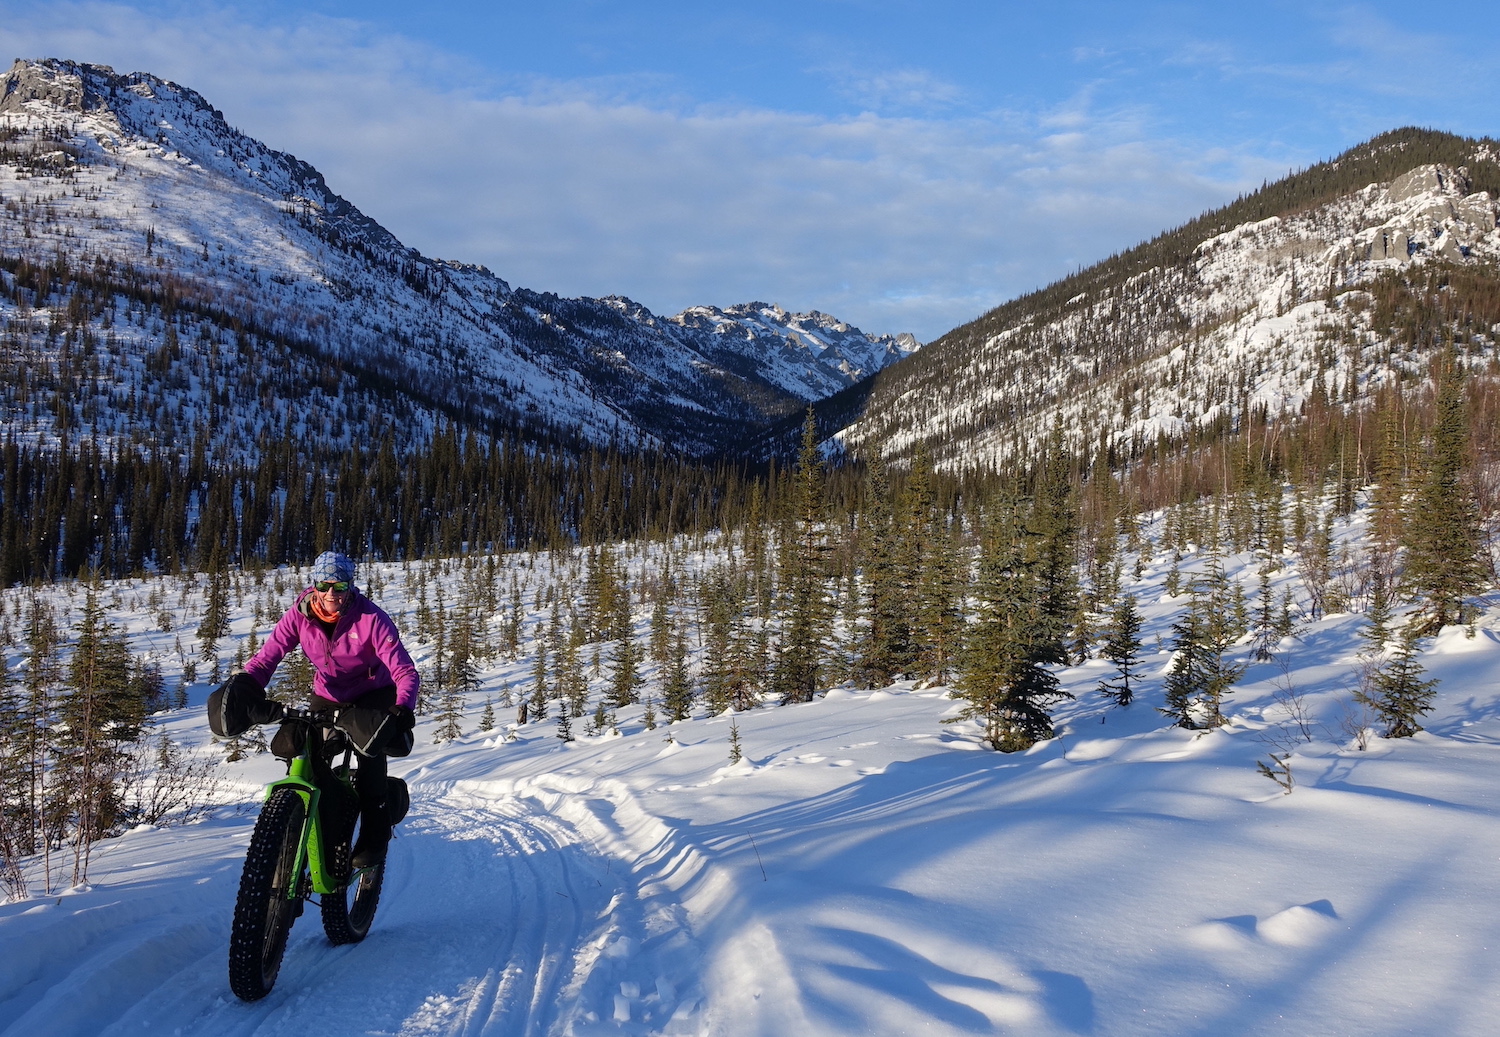 A woman rides a fat-tired bike on a snow trail surrounded by small spruce trees in a valley between mountains.